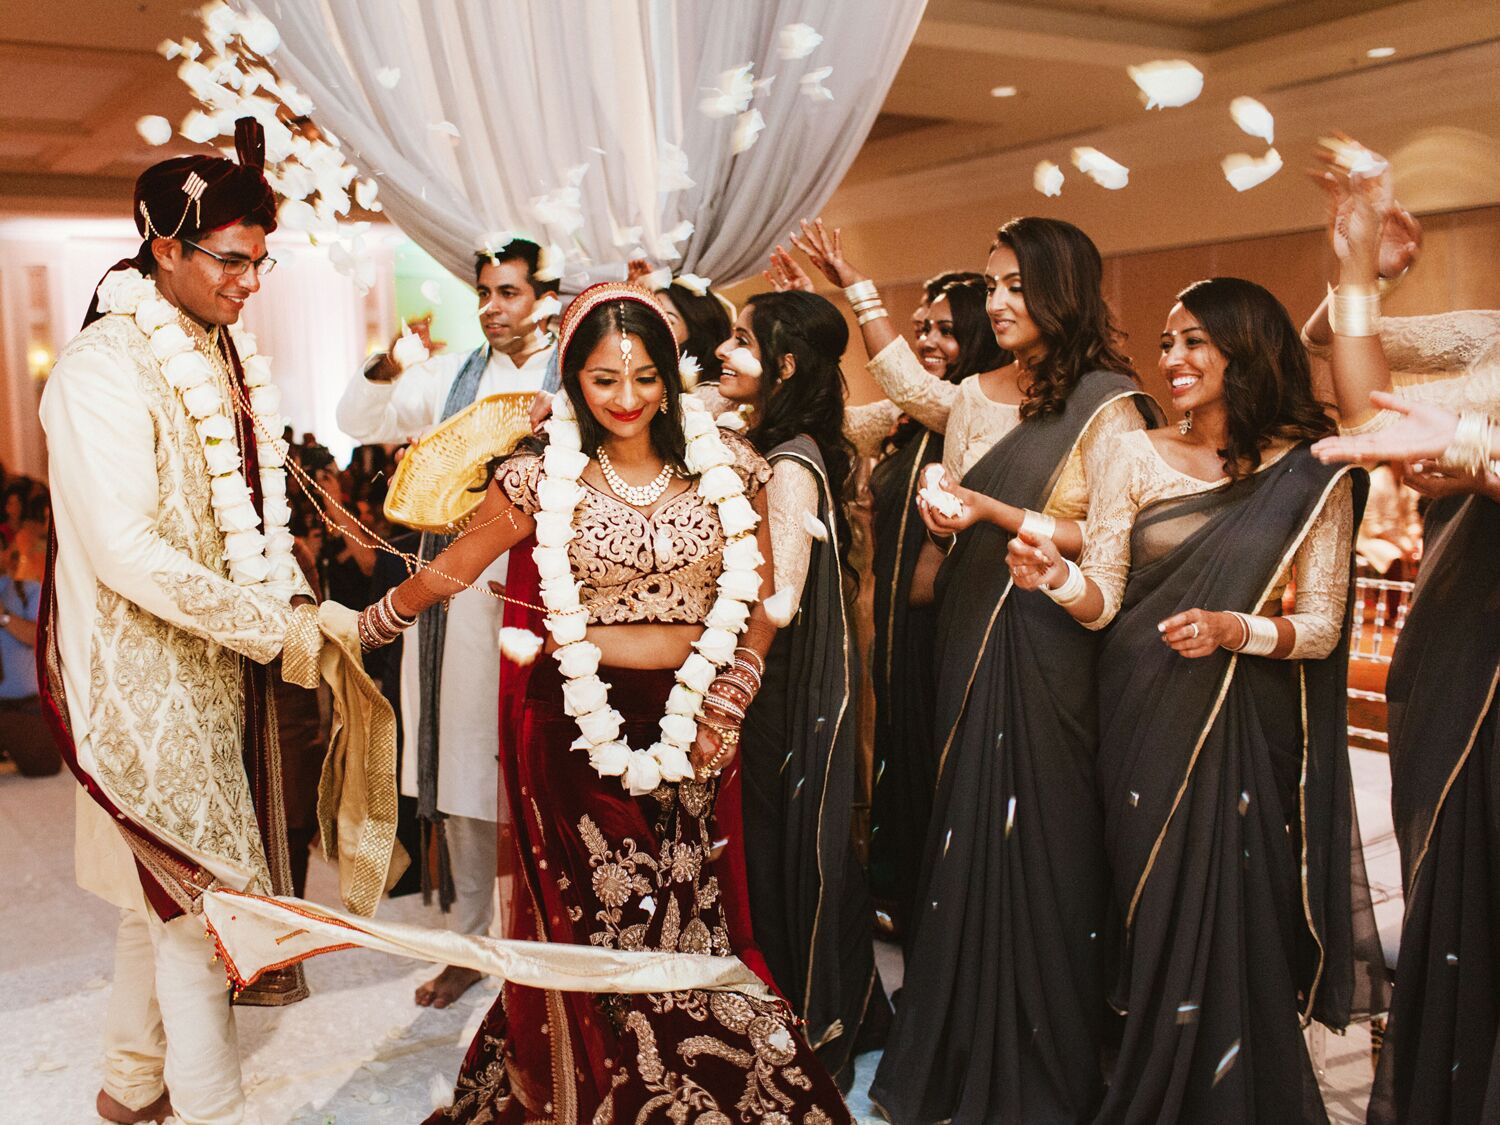 While Planning A Traditional Wedding Ceremony Keep These Things In Mind